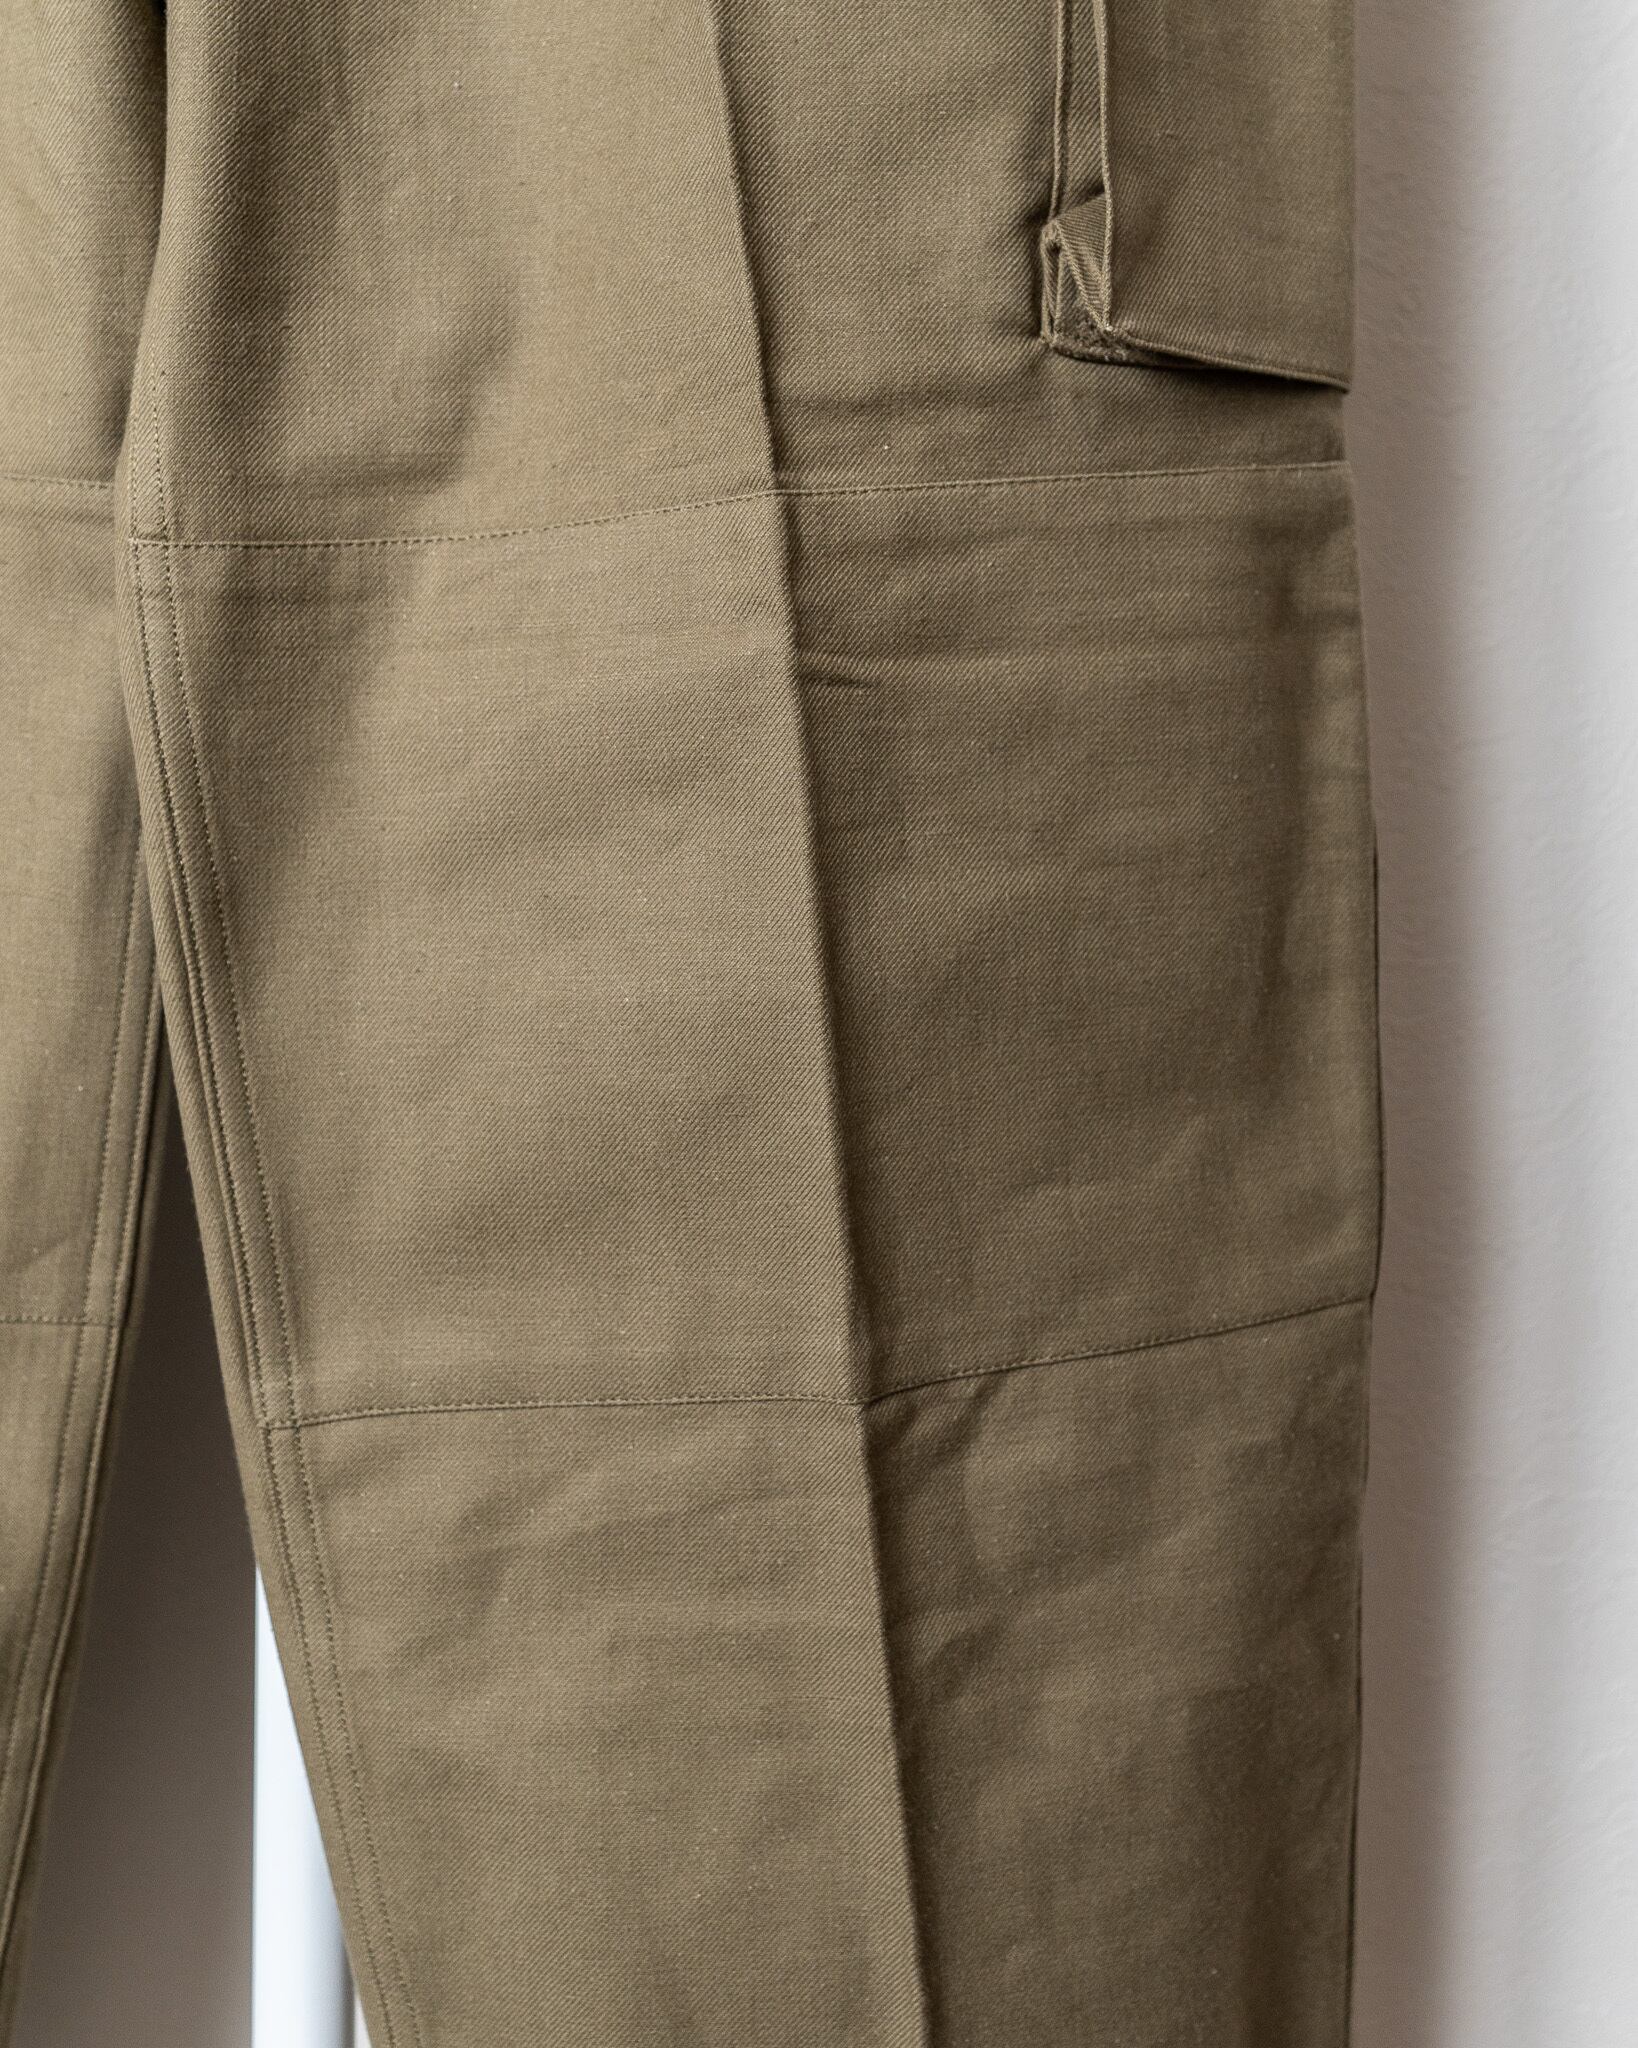 DEADSTOCKFrench Army M Trousers Early Model Size ① 実物